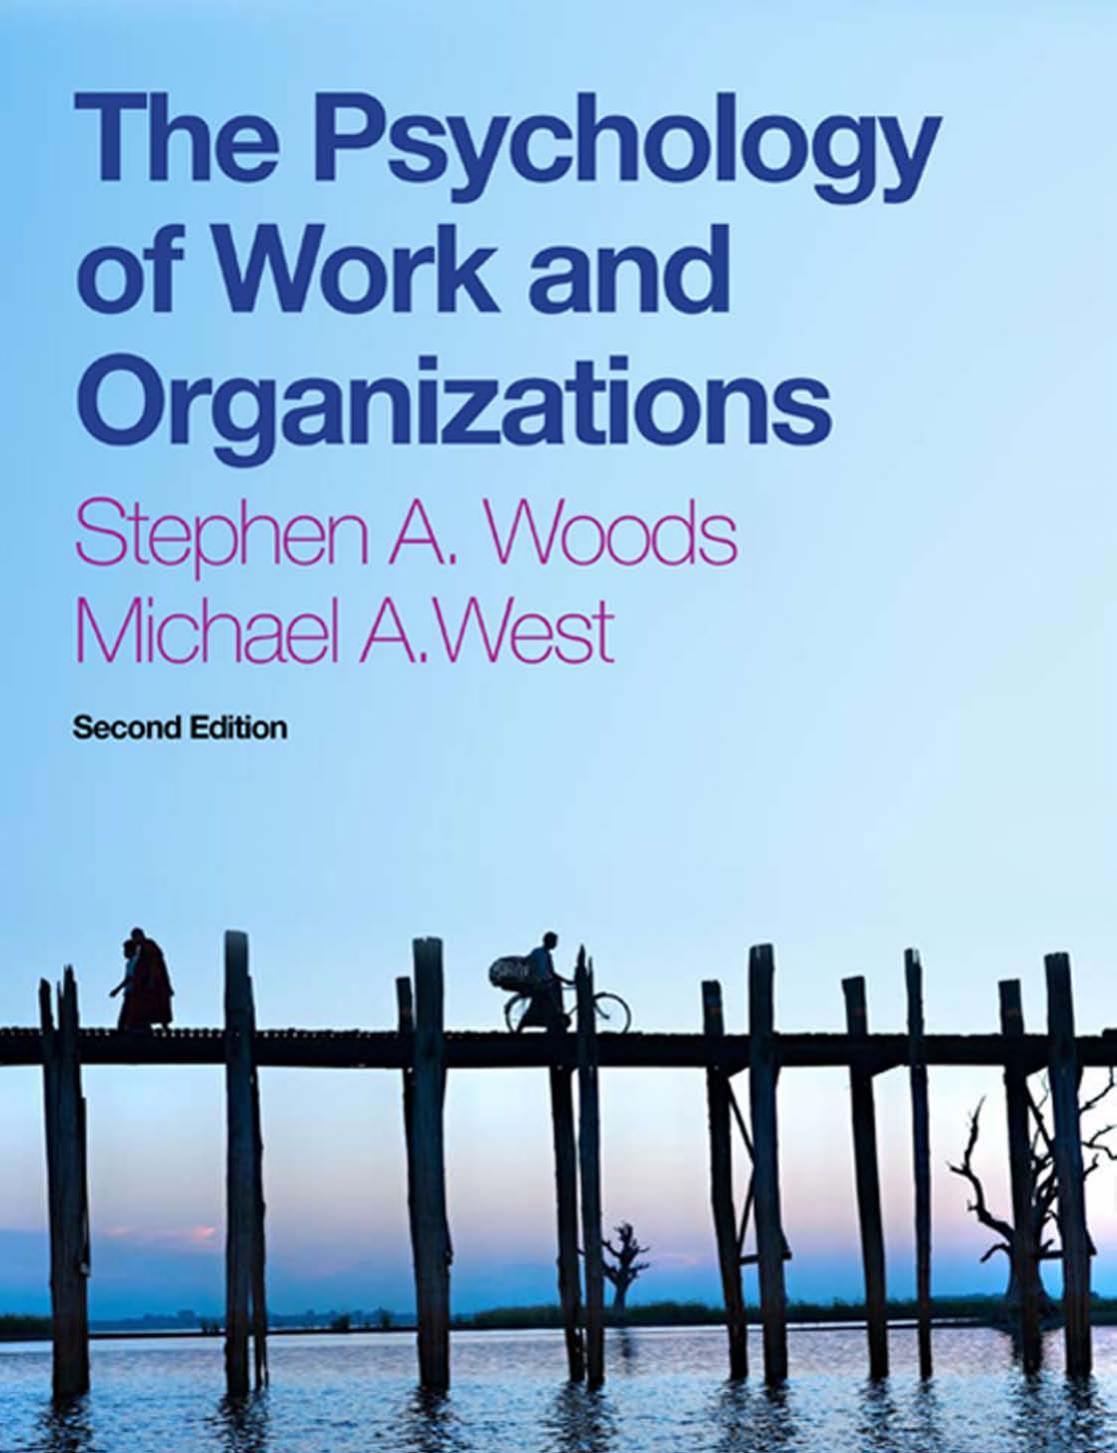 (eBook PDF)The psychology of work and organization 2nd Edition by Stephen Woods,Michael West